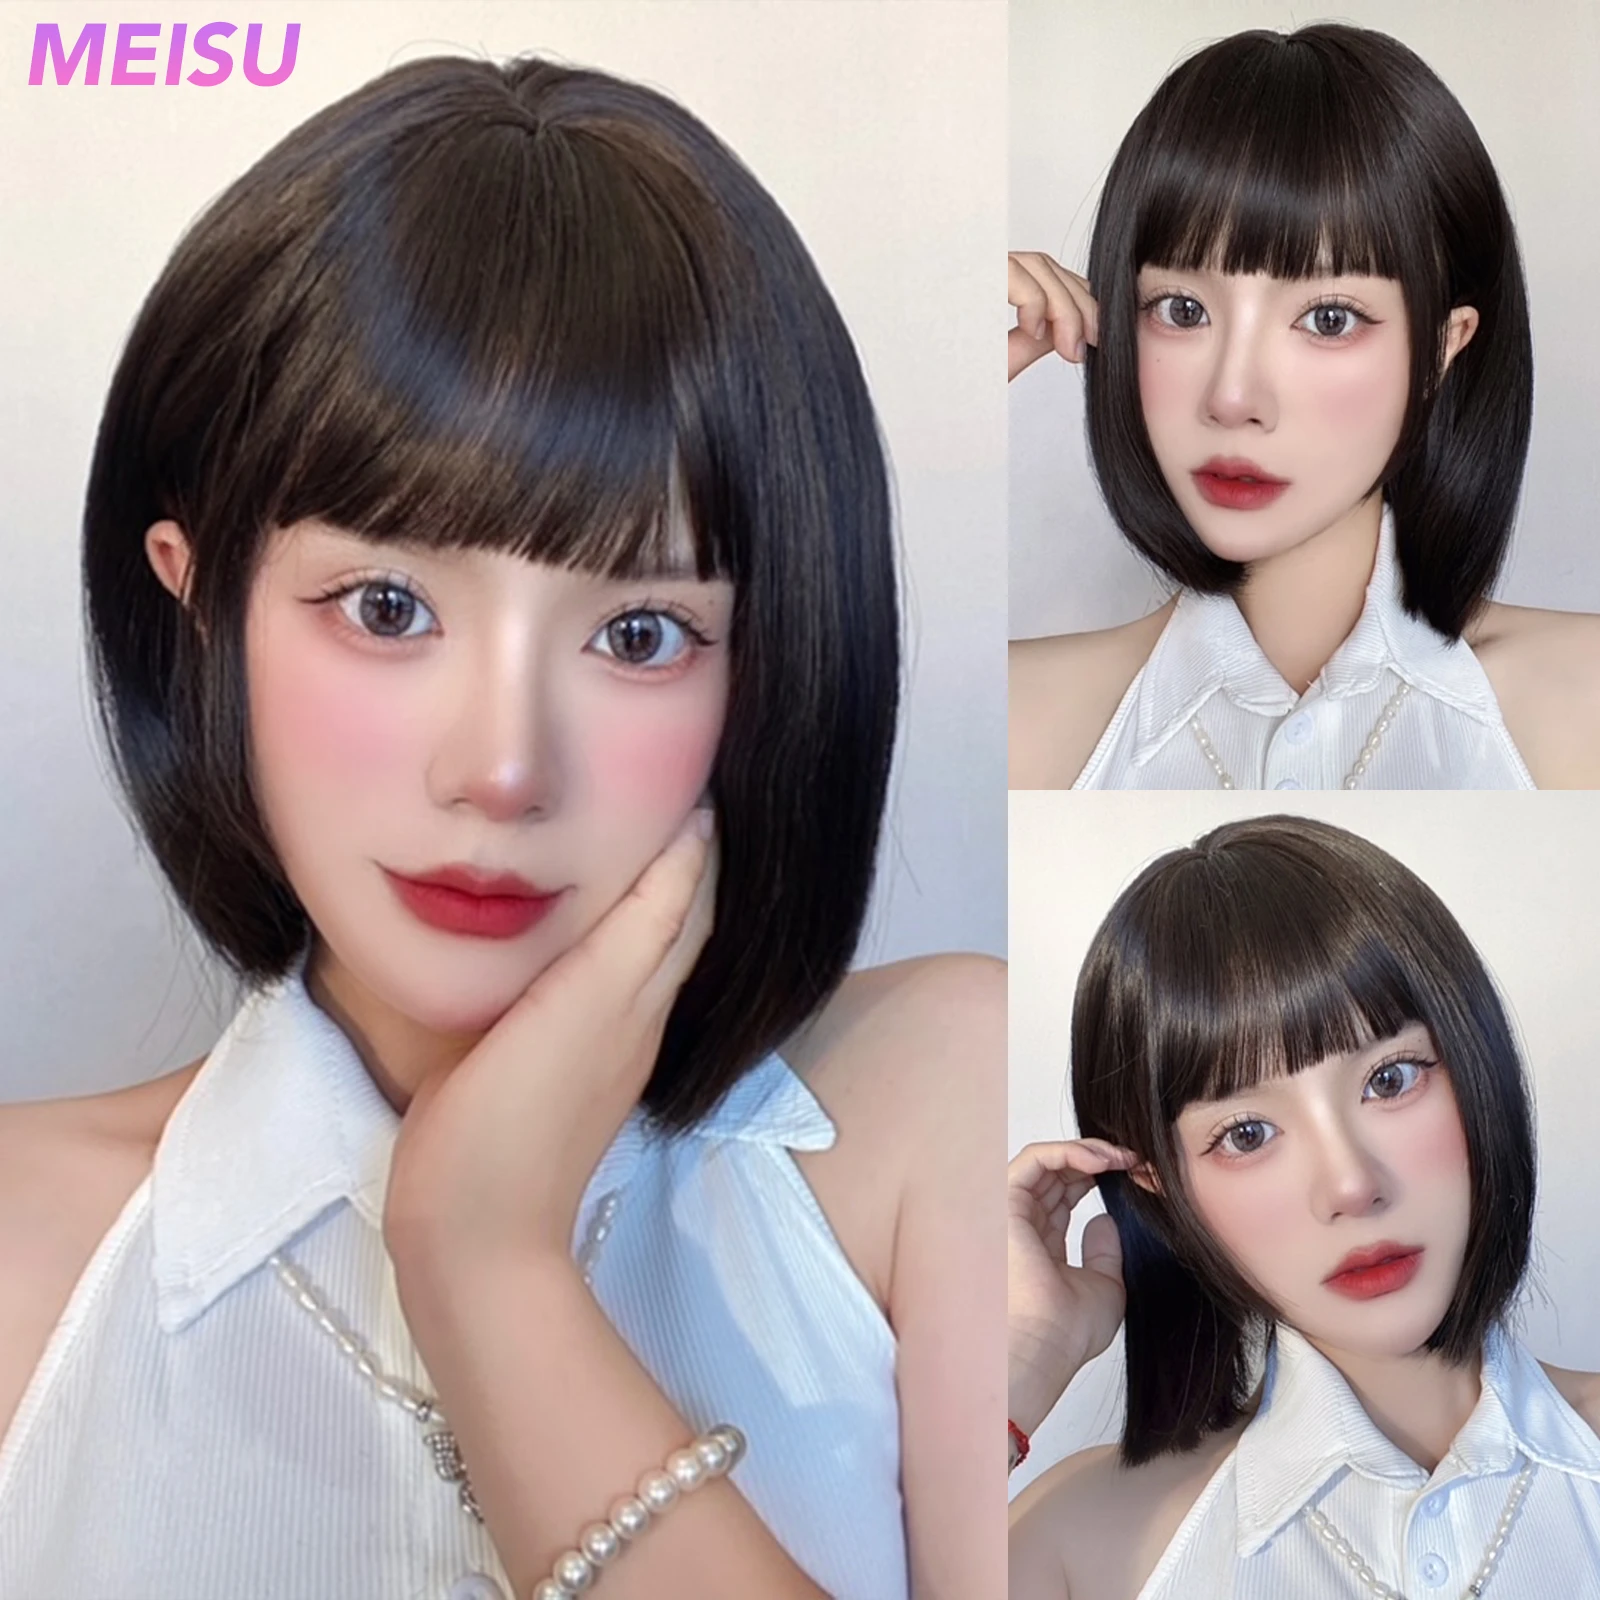 

MEISU Bob 10 Inch Short Black Stairght Bangs Wig Fiber Synthetic Wig Heat-resistant Non-Glare Natural Cosplay Daily For Women